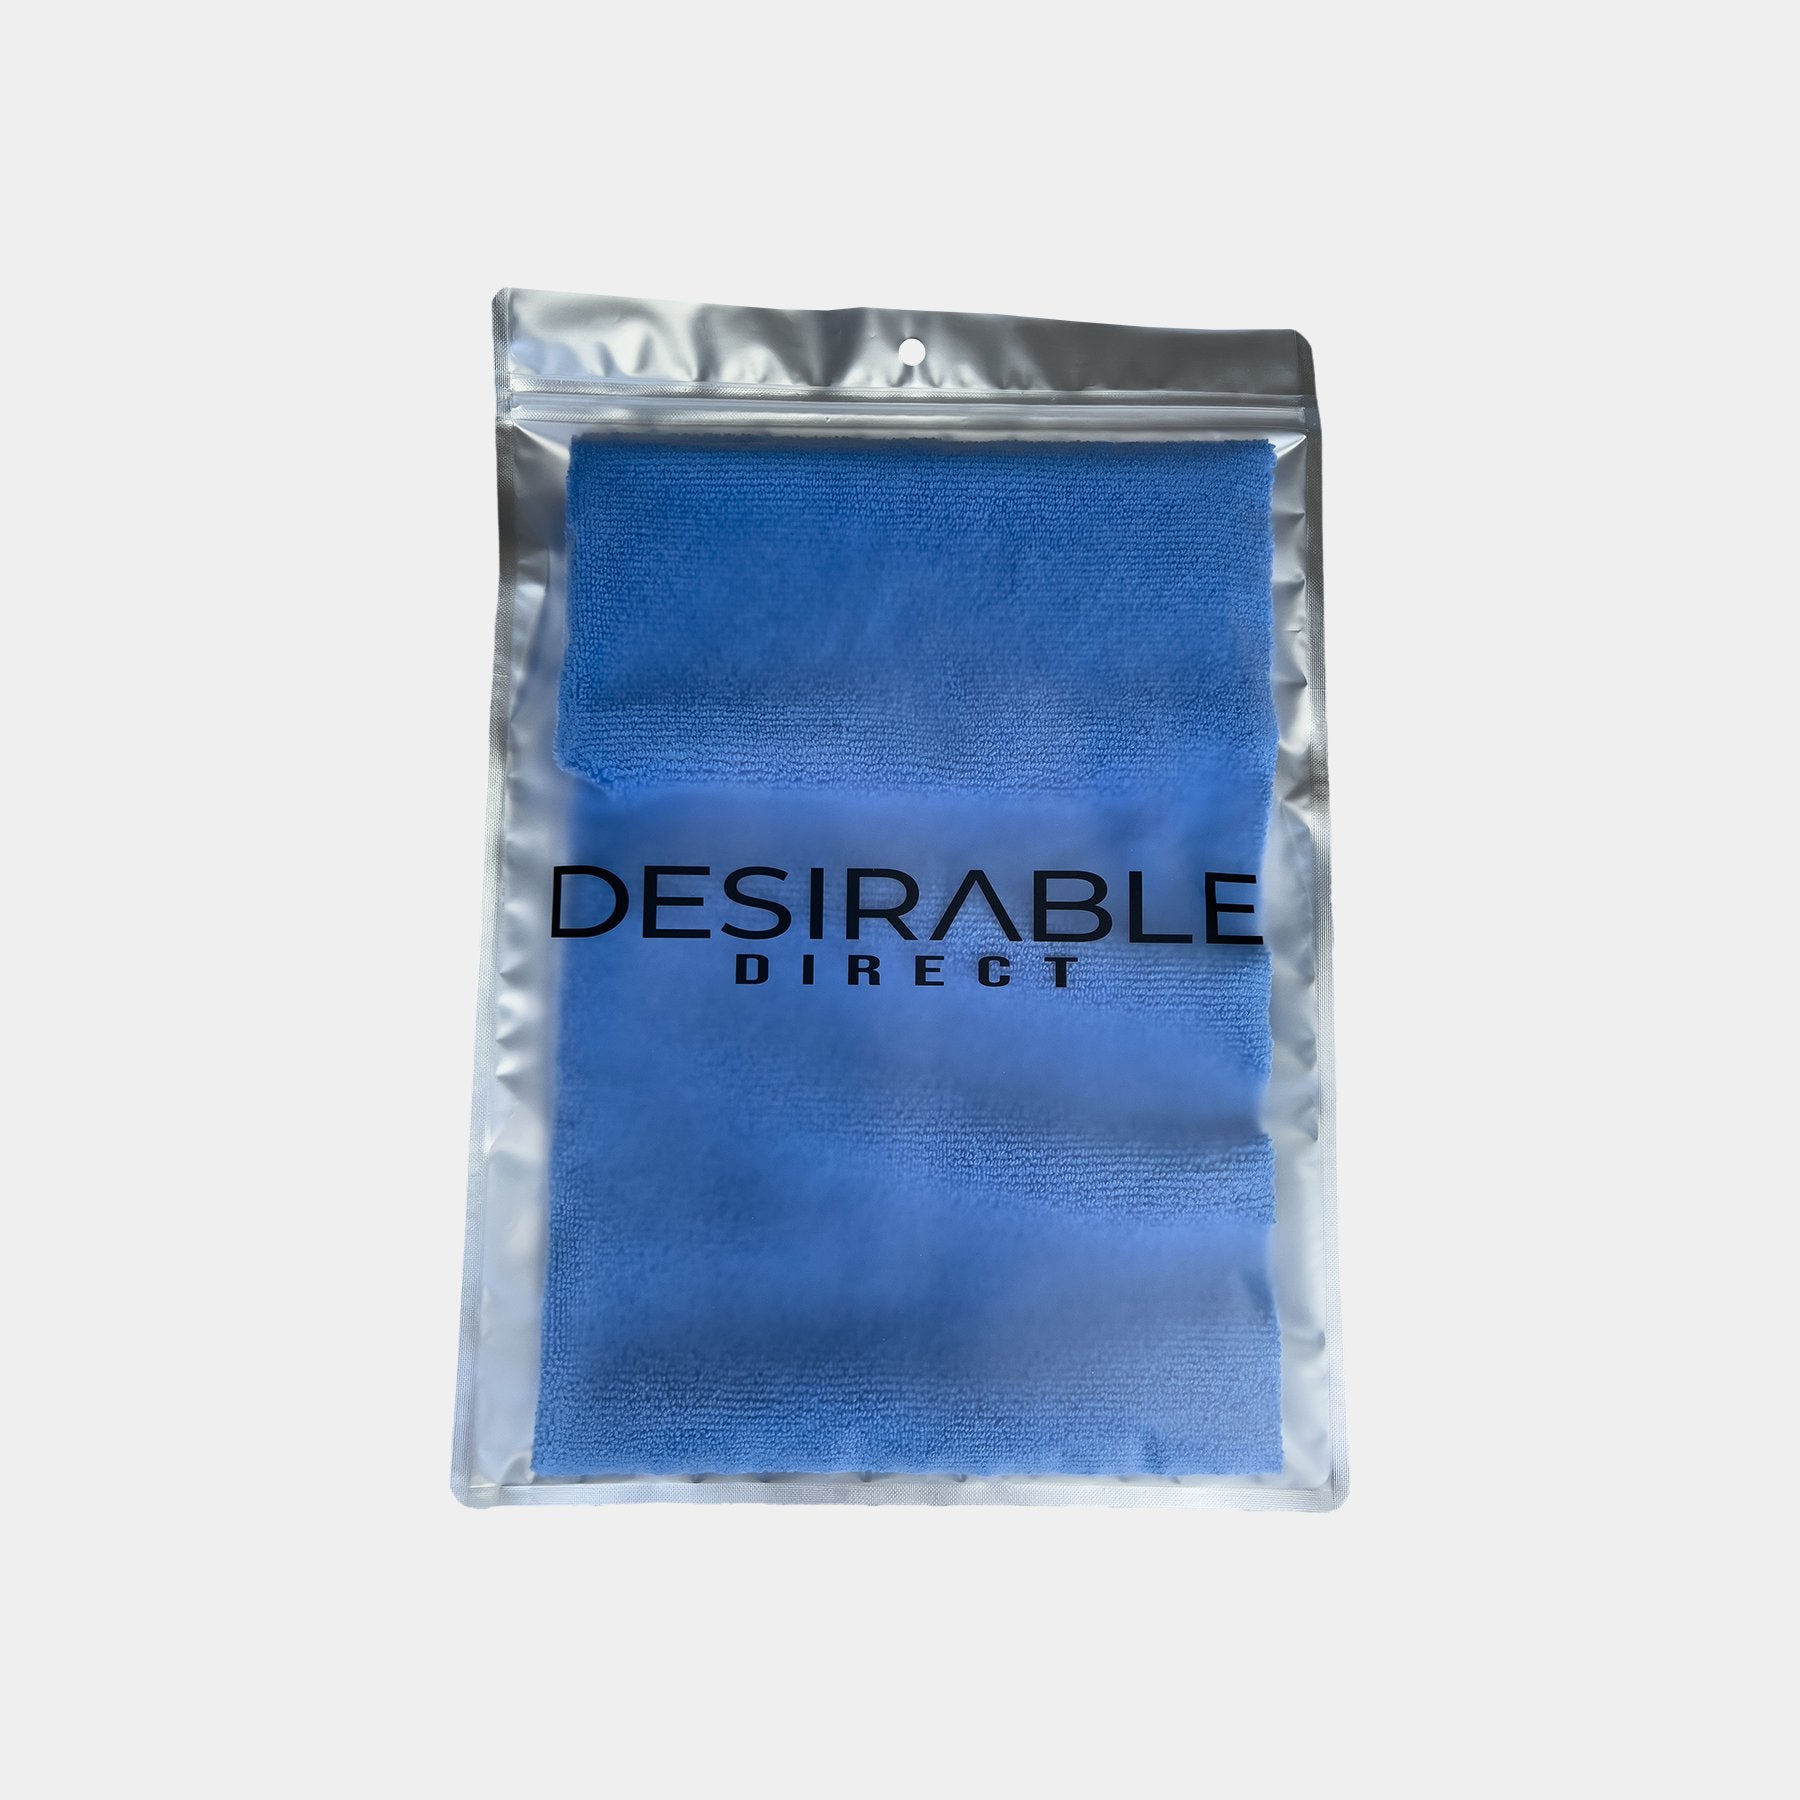 Car care microfibre soft blue multi-purpose cloth 40x40cm displayed on a white background in silver packaging with desirable direct printed on the front to keep the item clean when not in use.